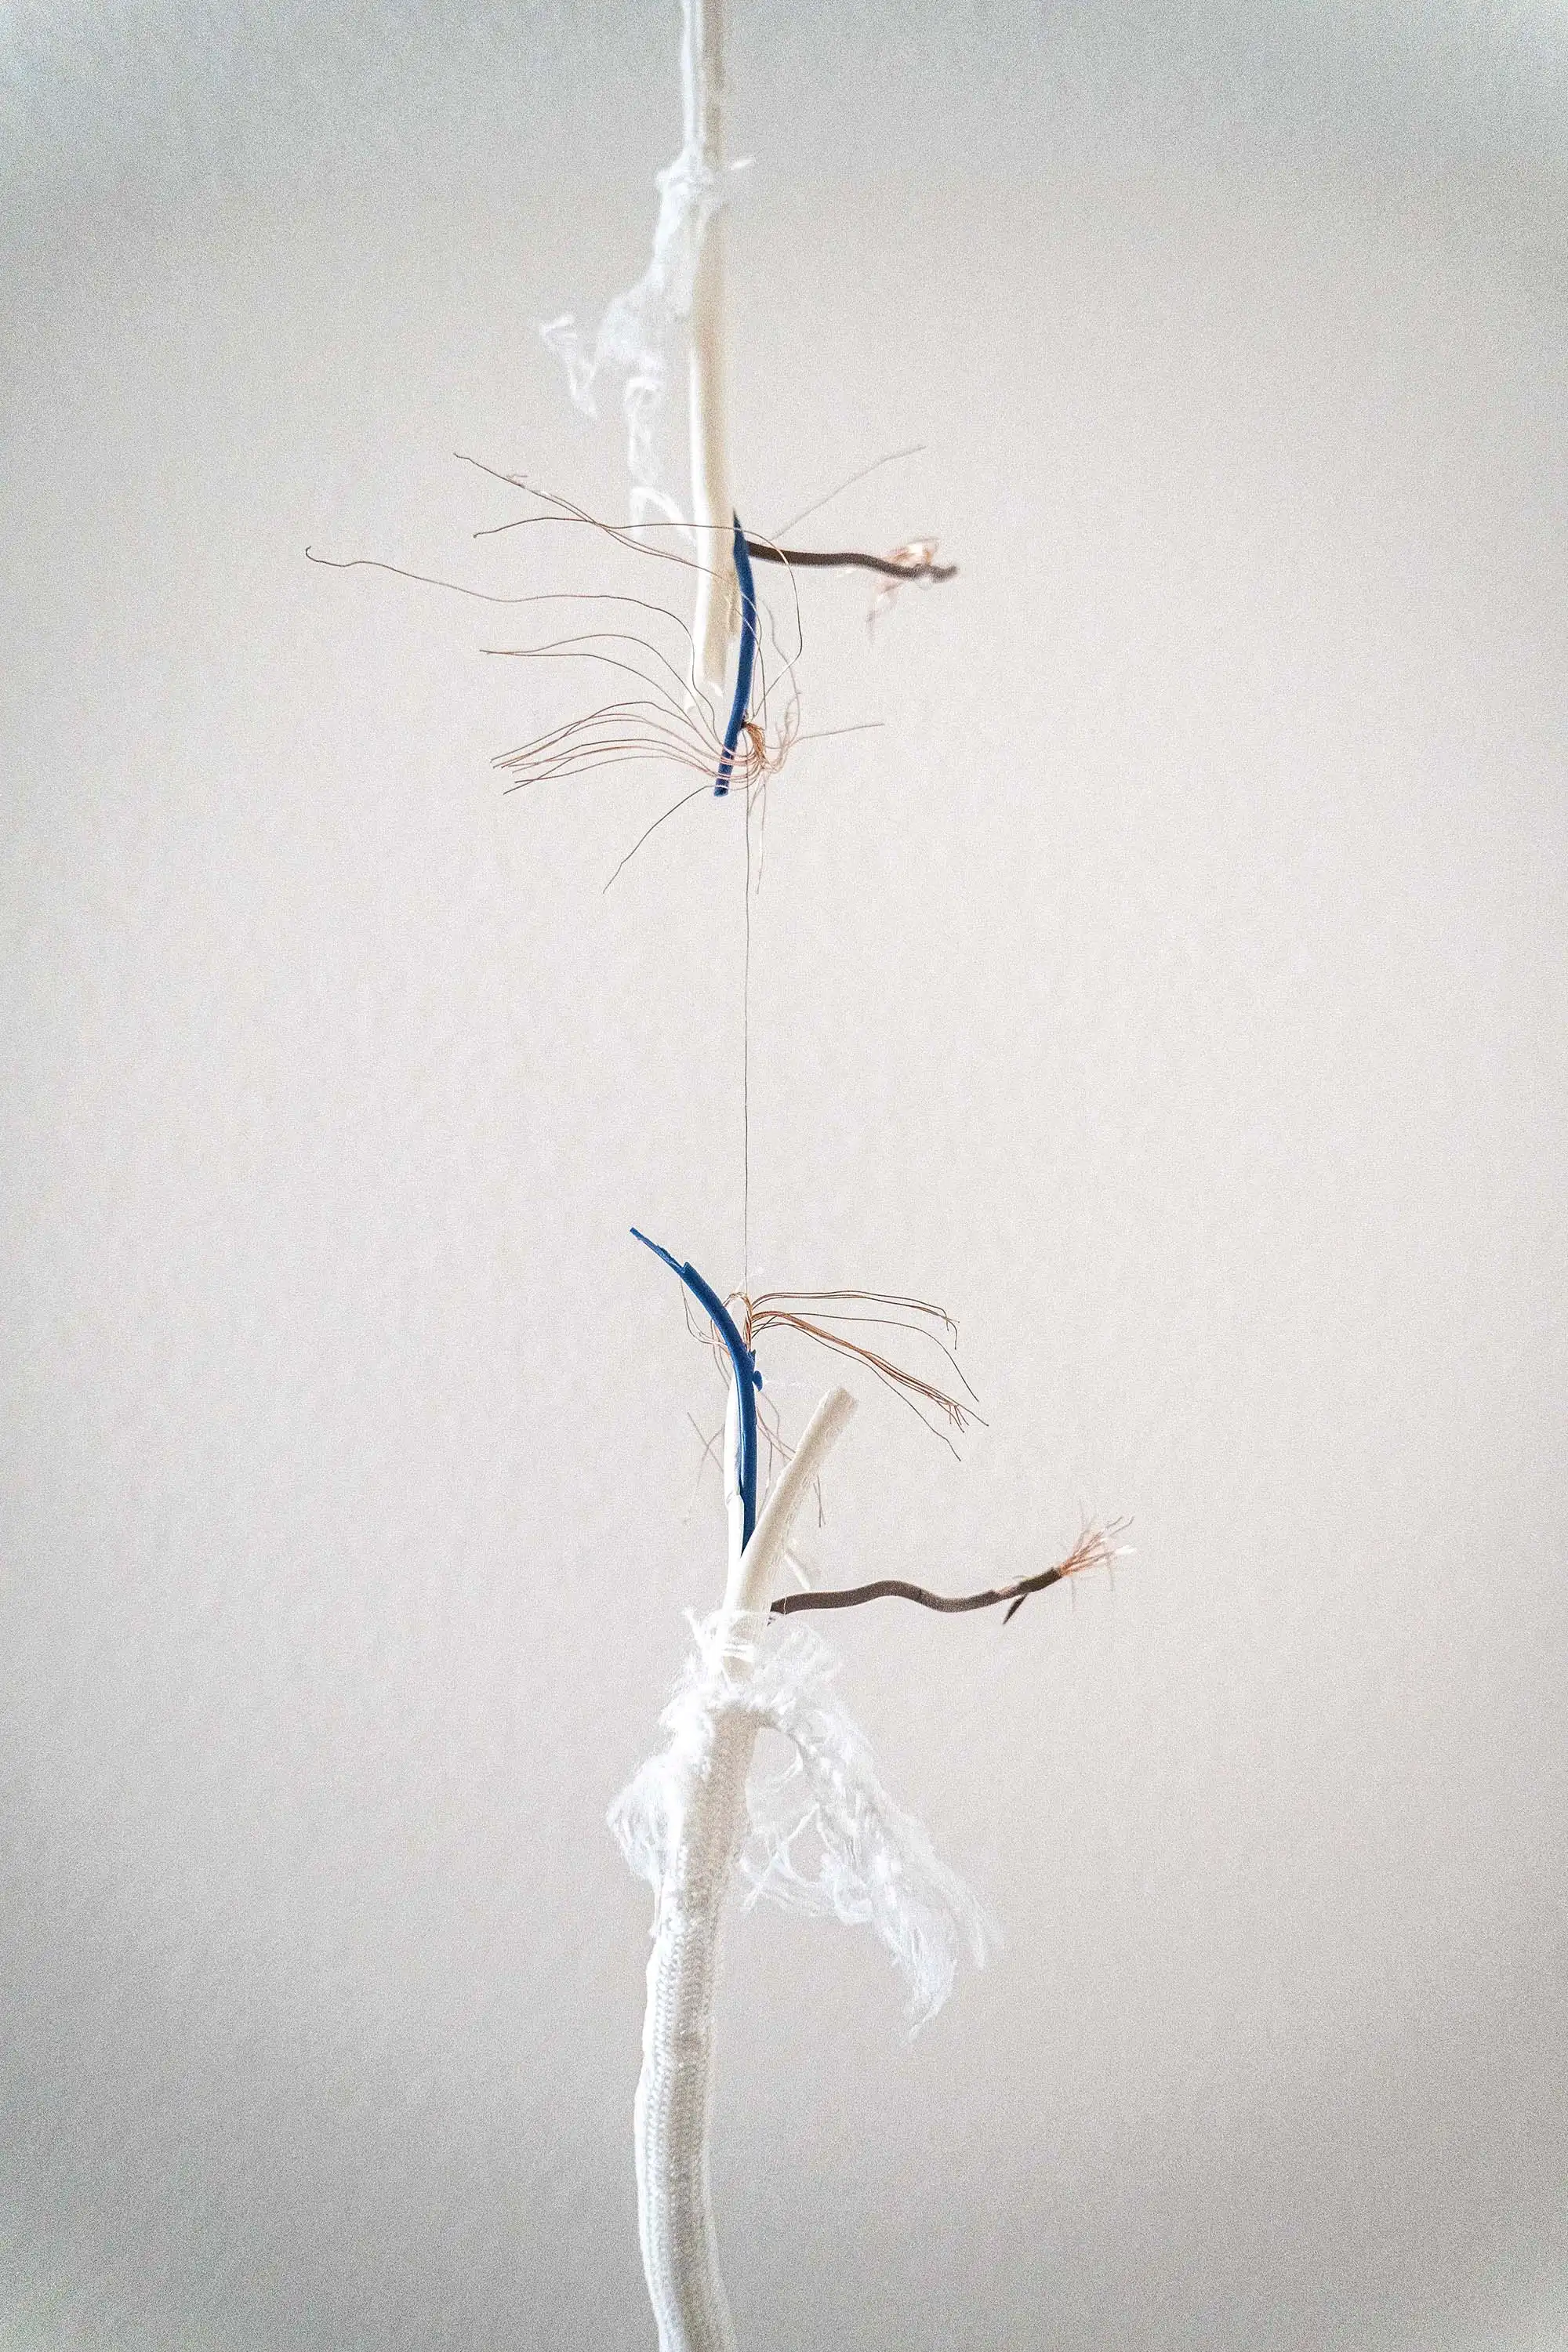 Close up of the installation in front of a white wall. A cable is in the middle of the frame vertically. The middle of the cable is ripped apart, the bare copper strand is visible. 